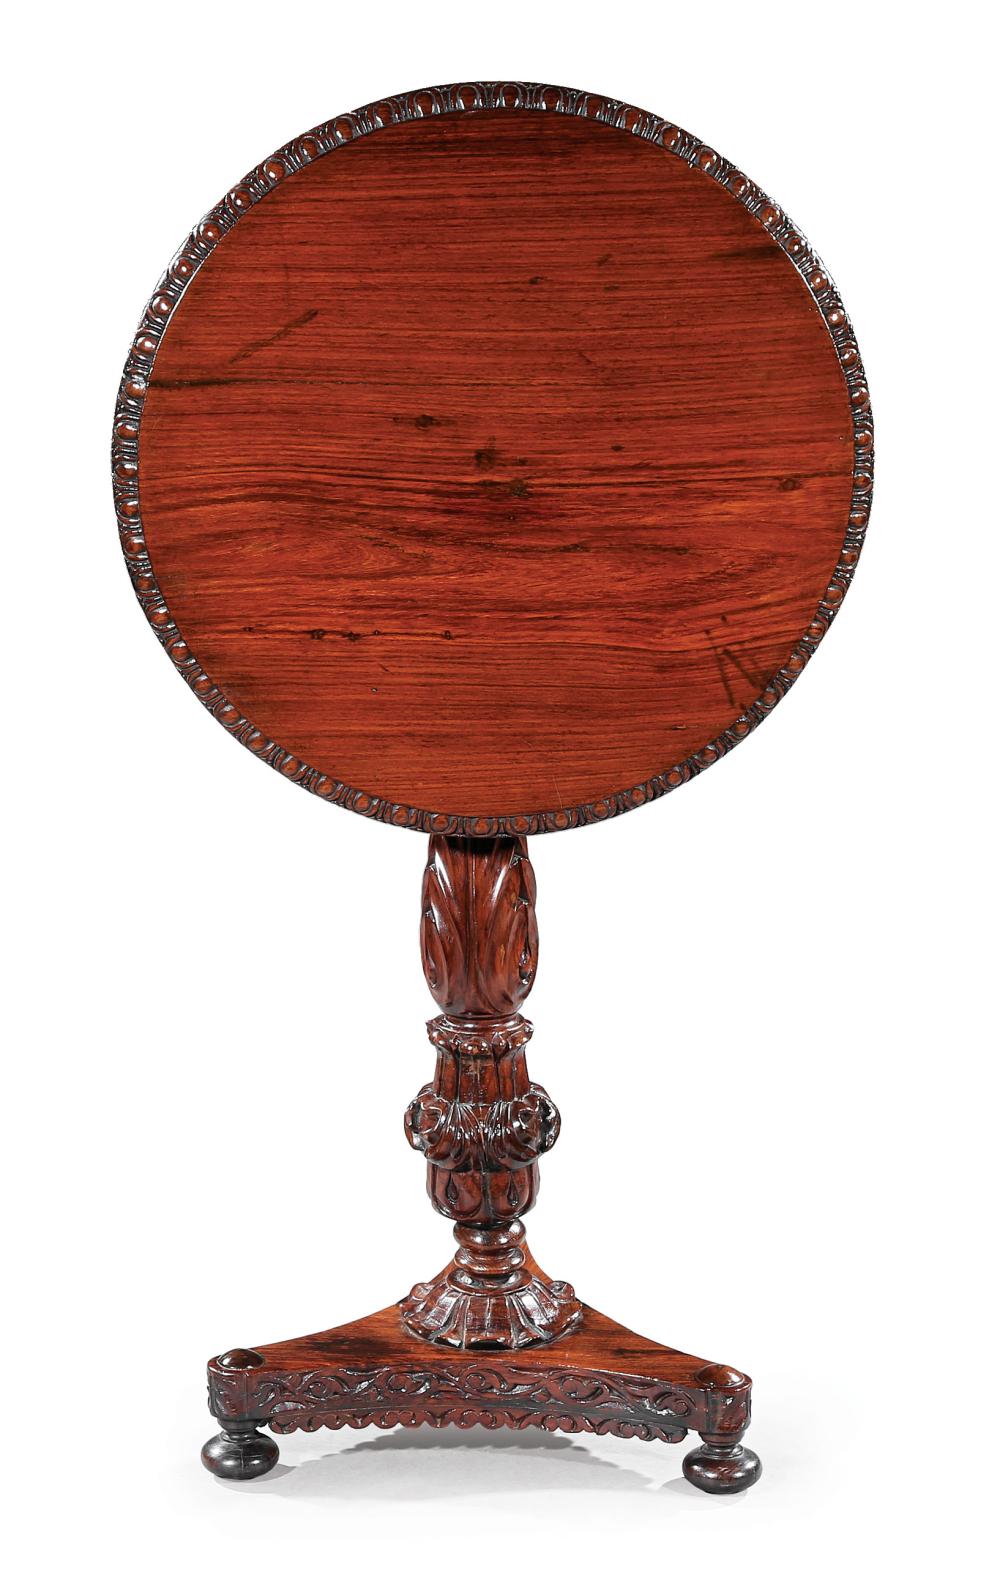 FINE ANGLO-COLONIAL CARVED ROSEWOOD